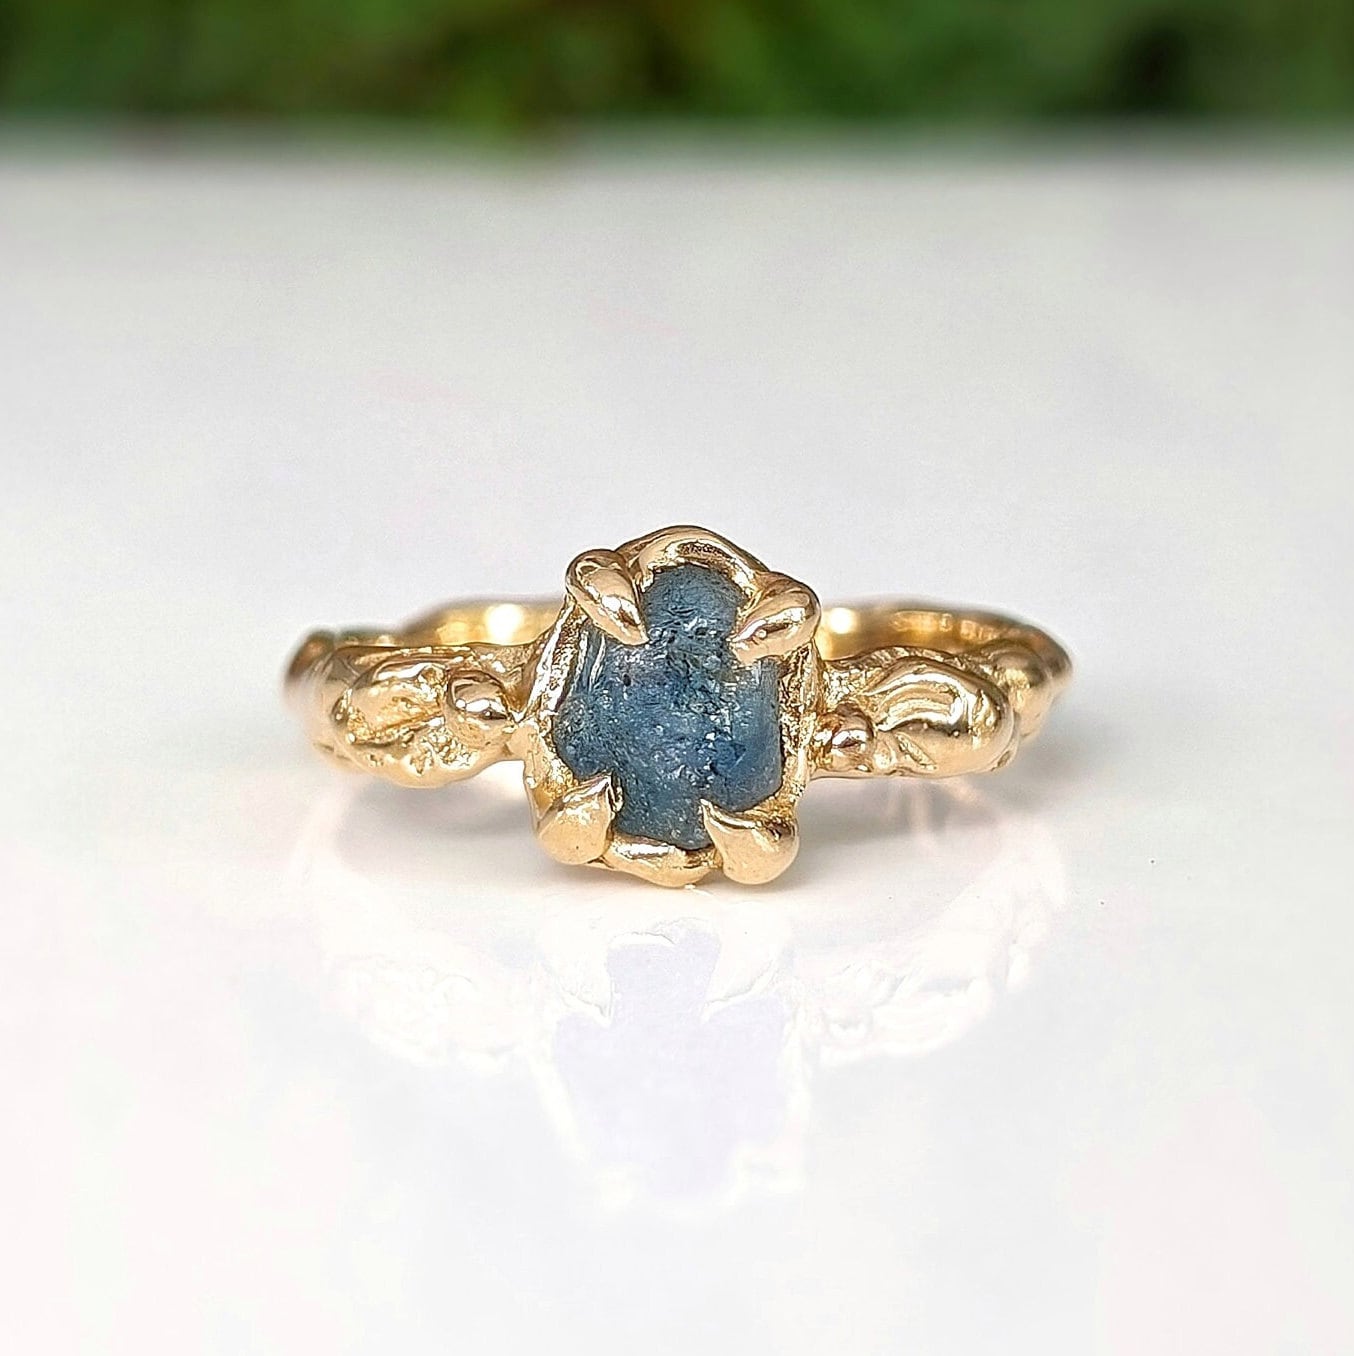 Raw Montana Sapphire set by prongs on a Molten Solid 14k Gold textured band